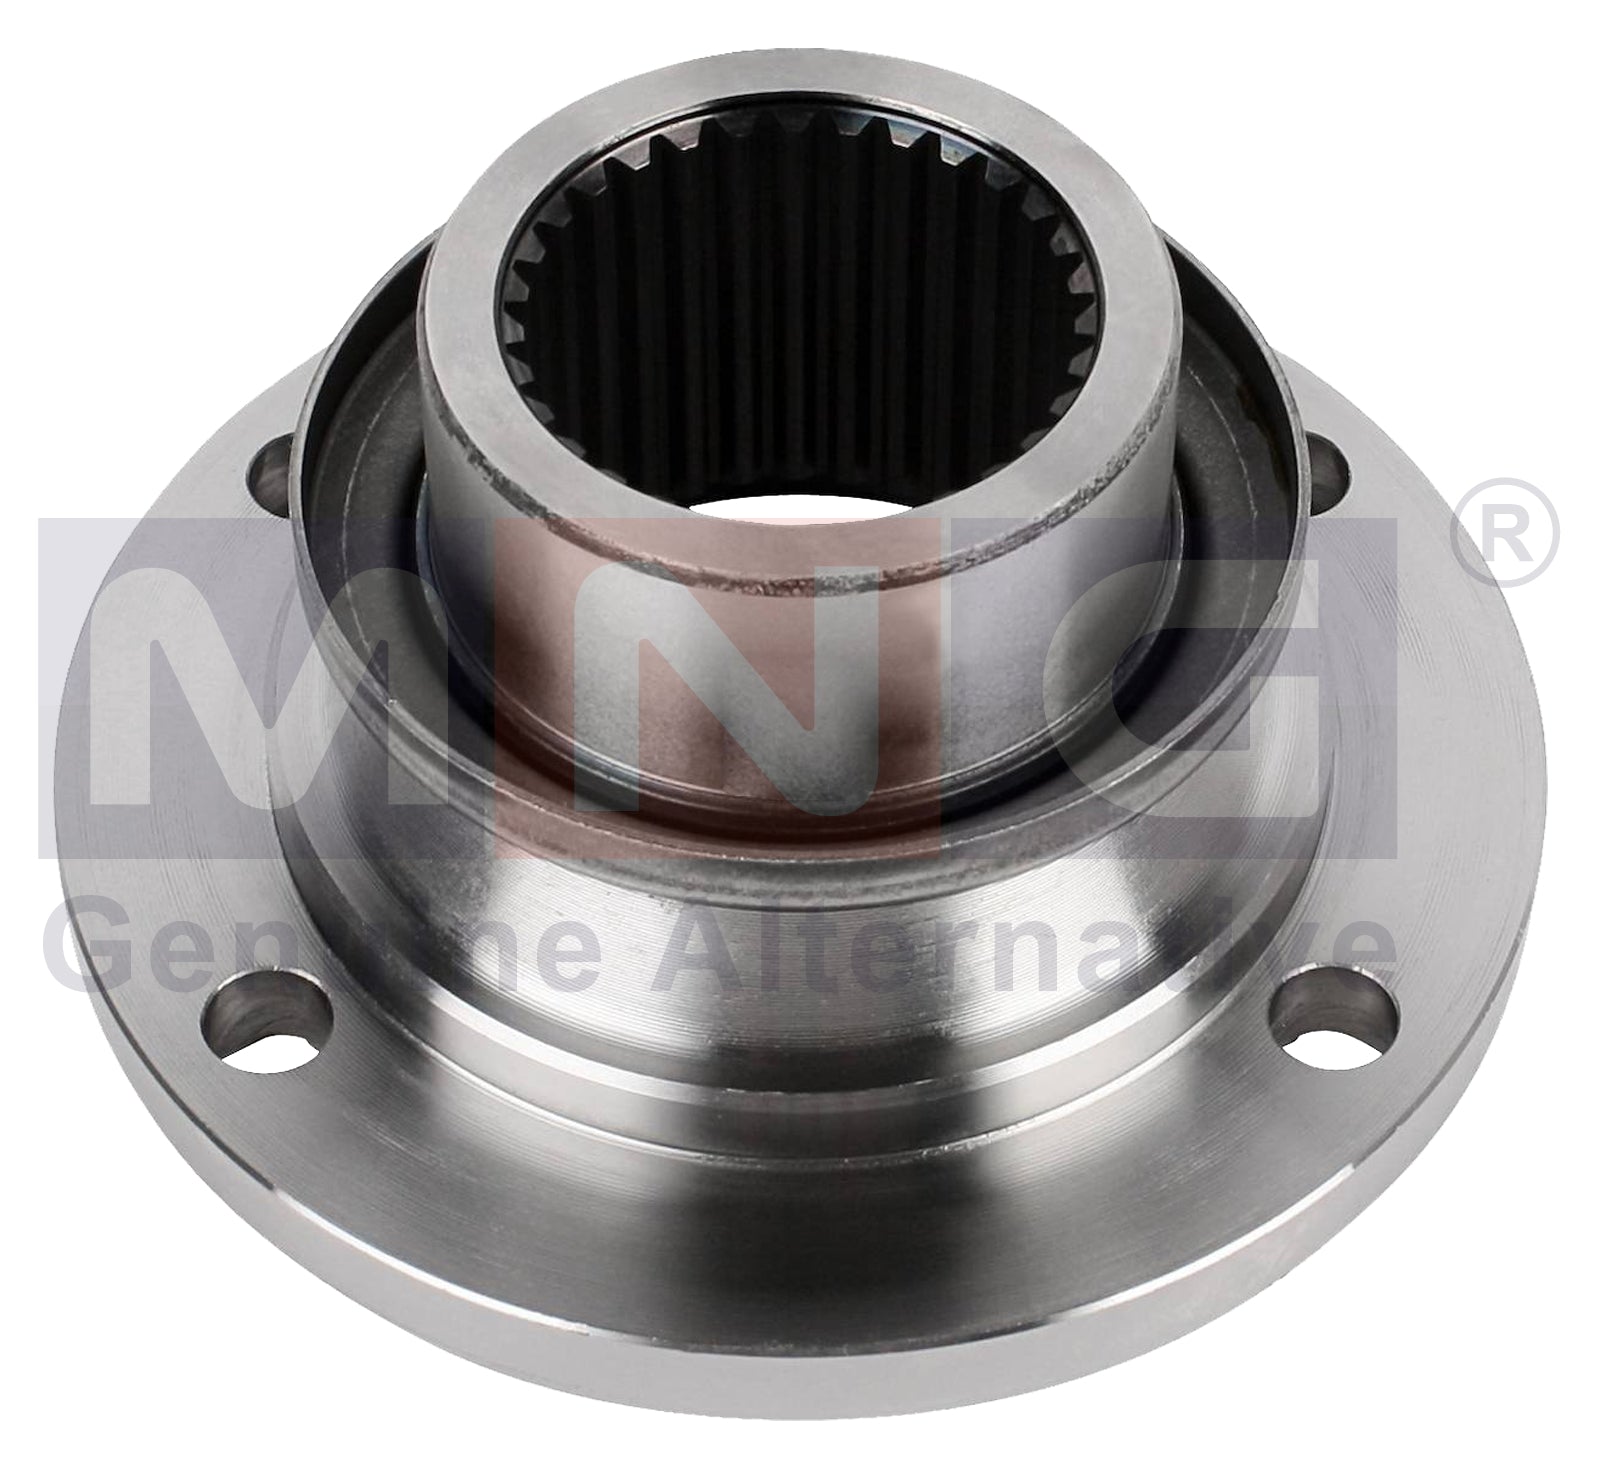 MNG Spare Parts  replaces AXLE FLENGE STAGGERED TEETH , 4 BOLT,  OM 441 , 3463501445